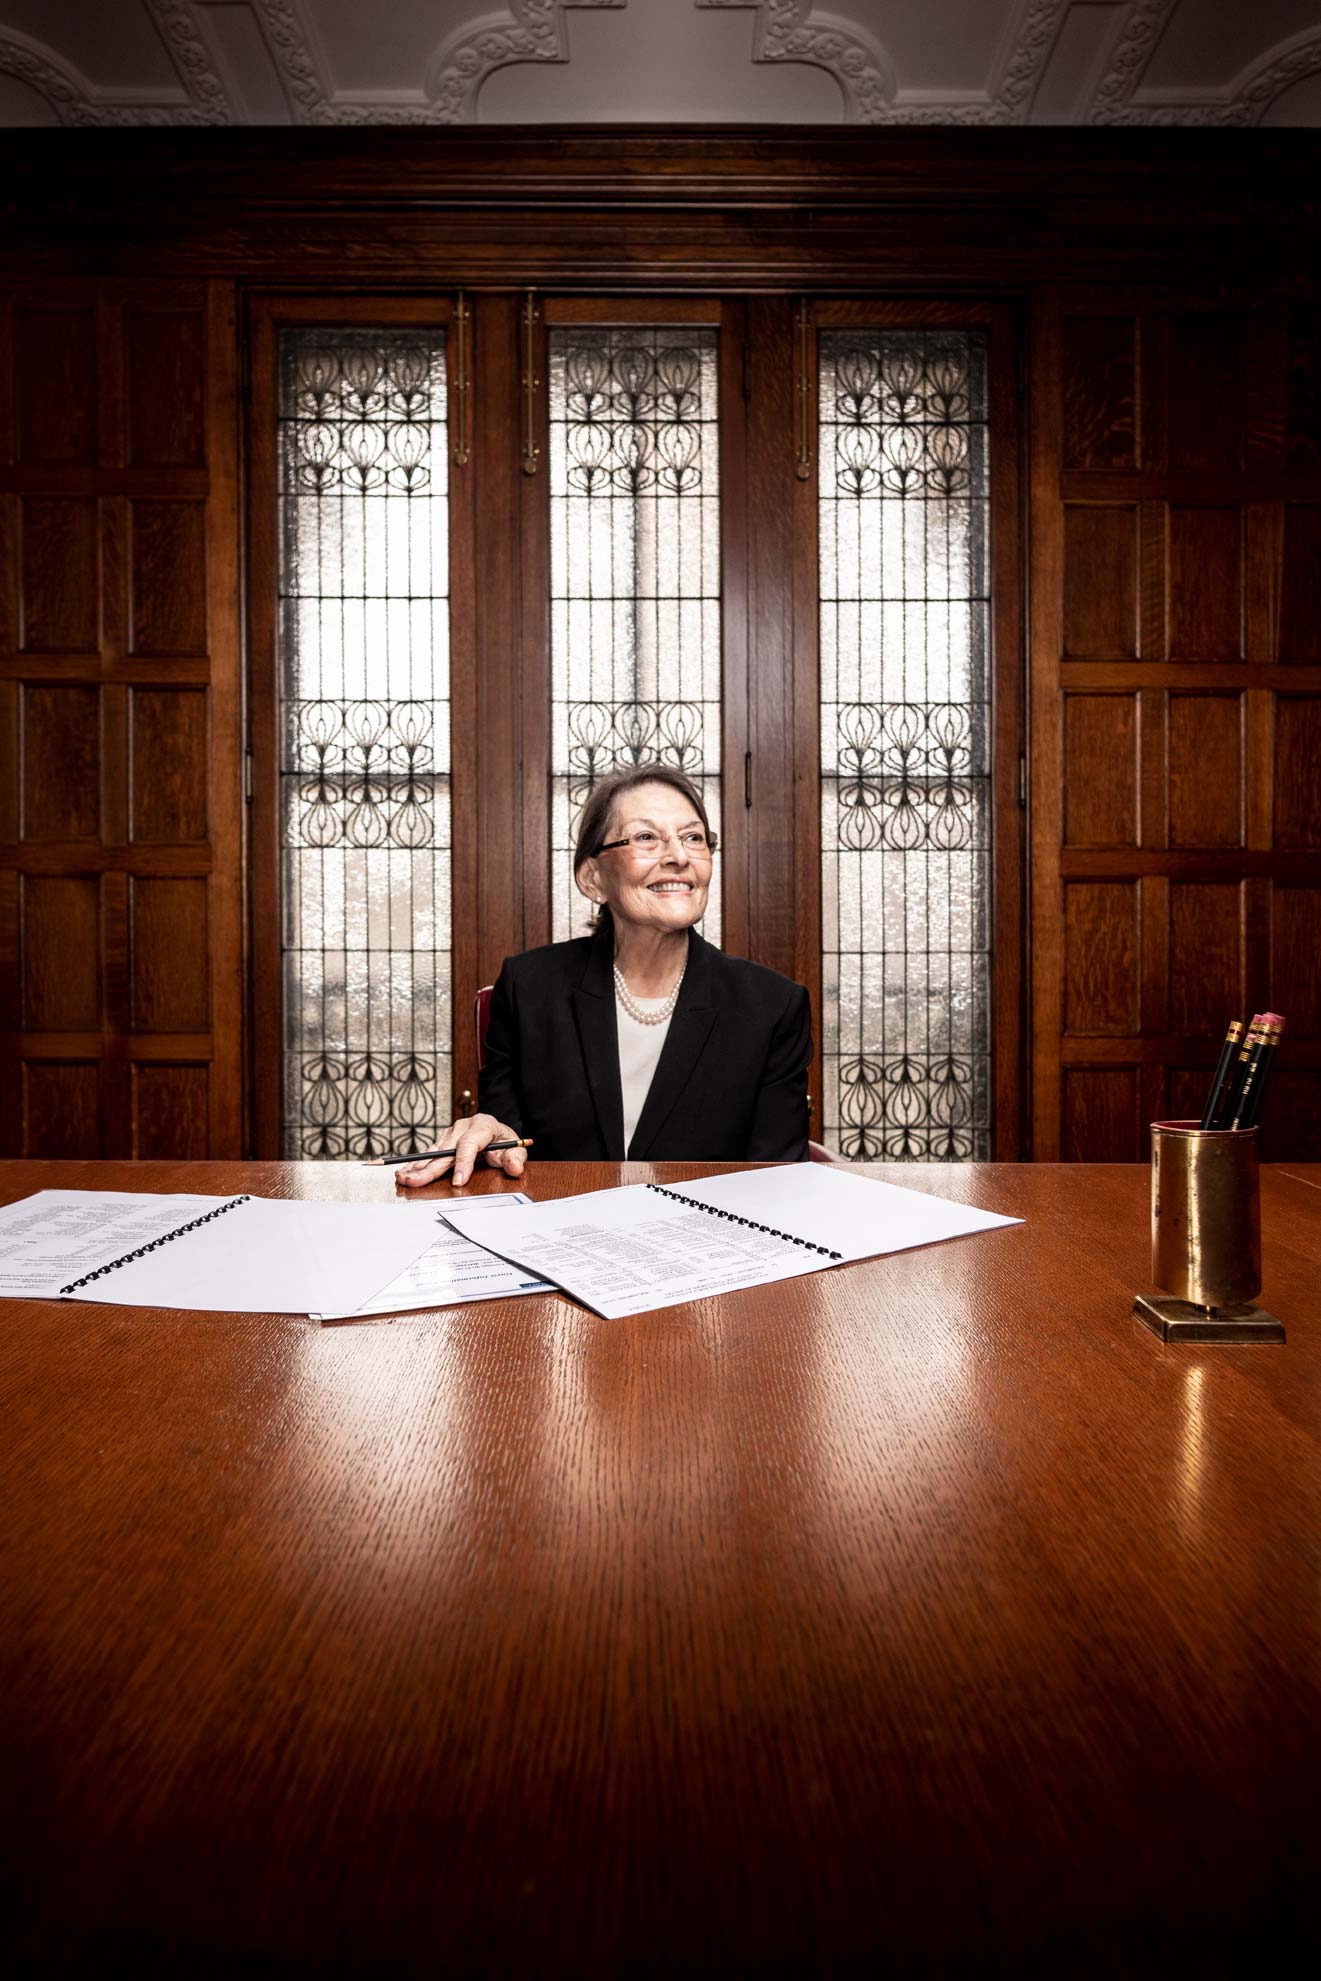 Divorce attorney Sheila Sachs seated at a desk in front of a large window